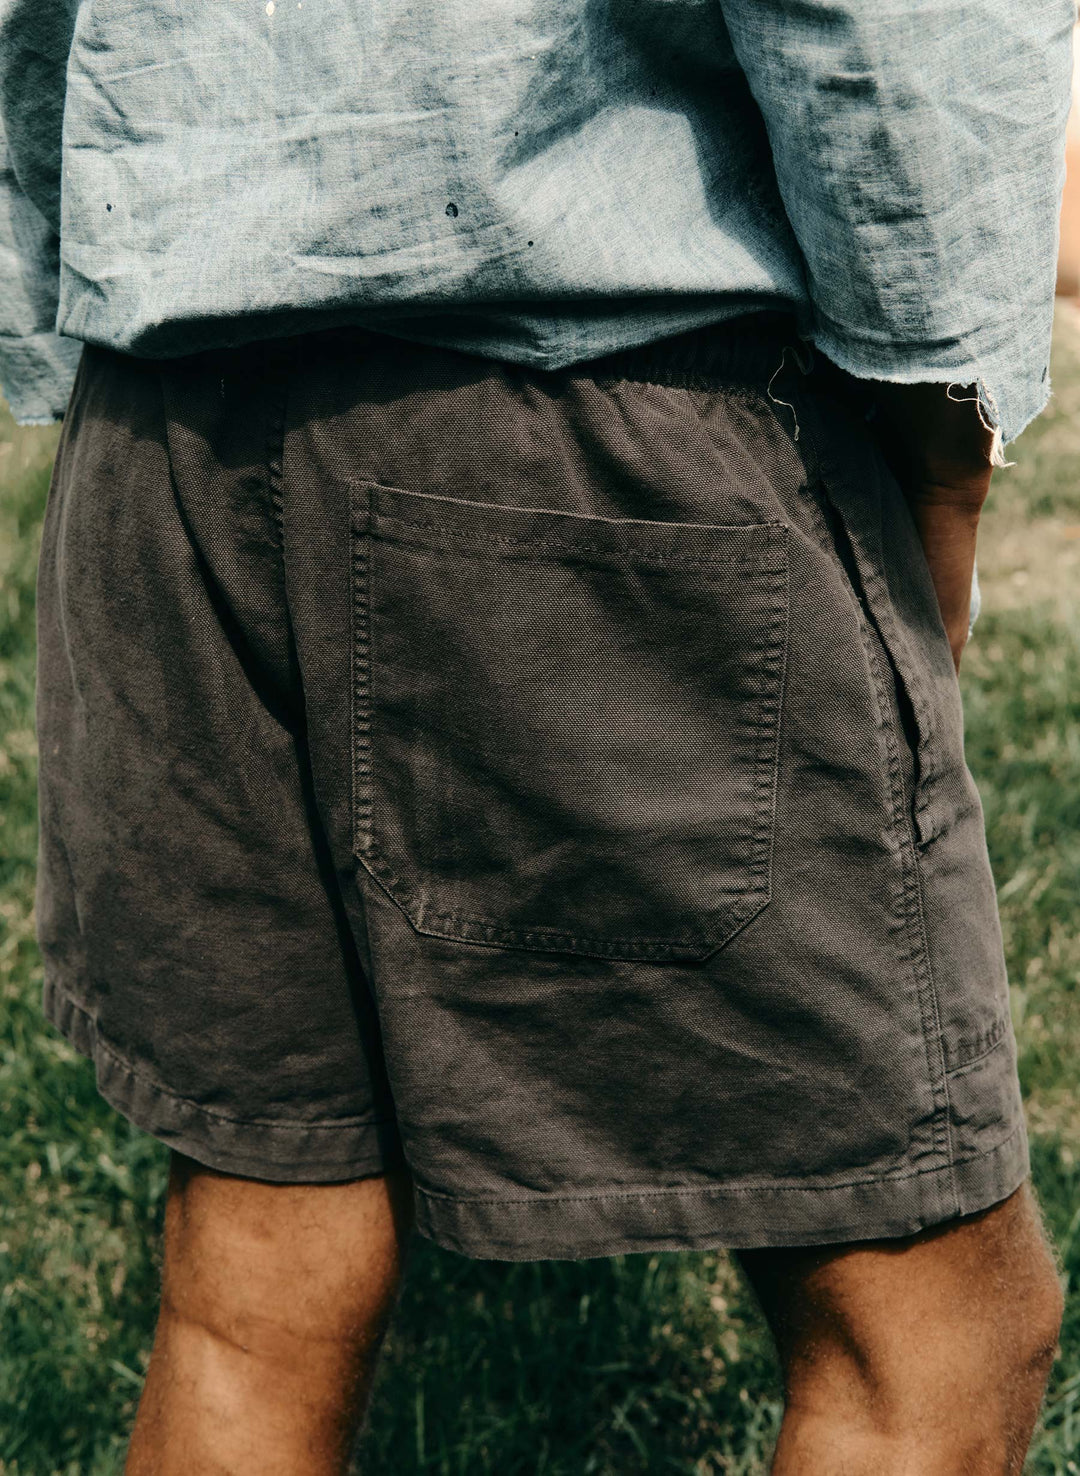 a person wearing shorts